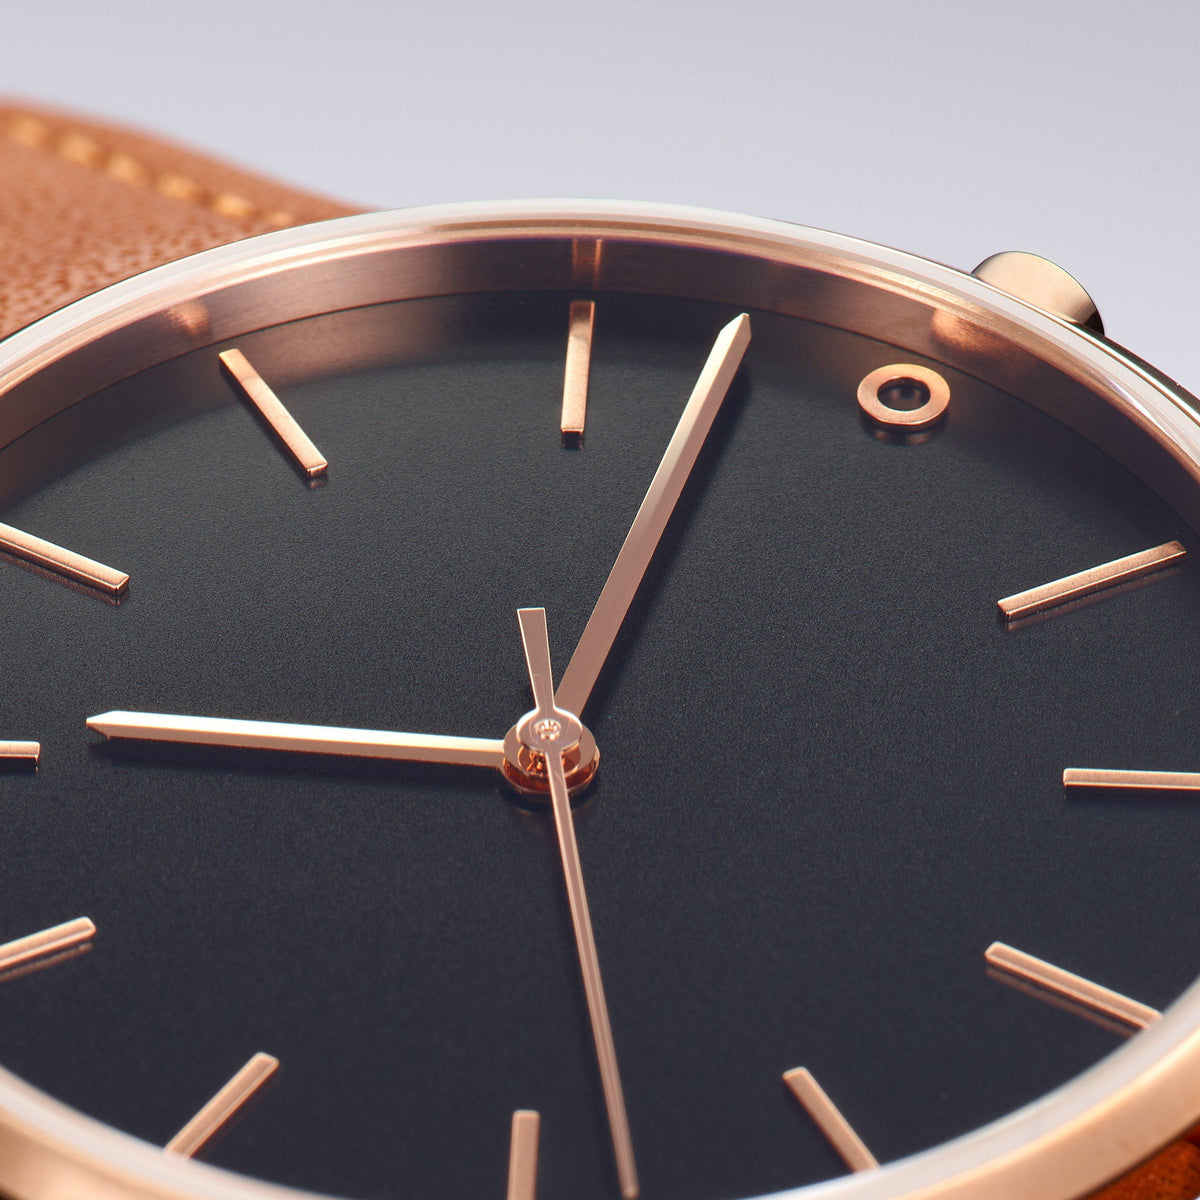 The Black and Rose Gold Watch - NATO